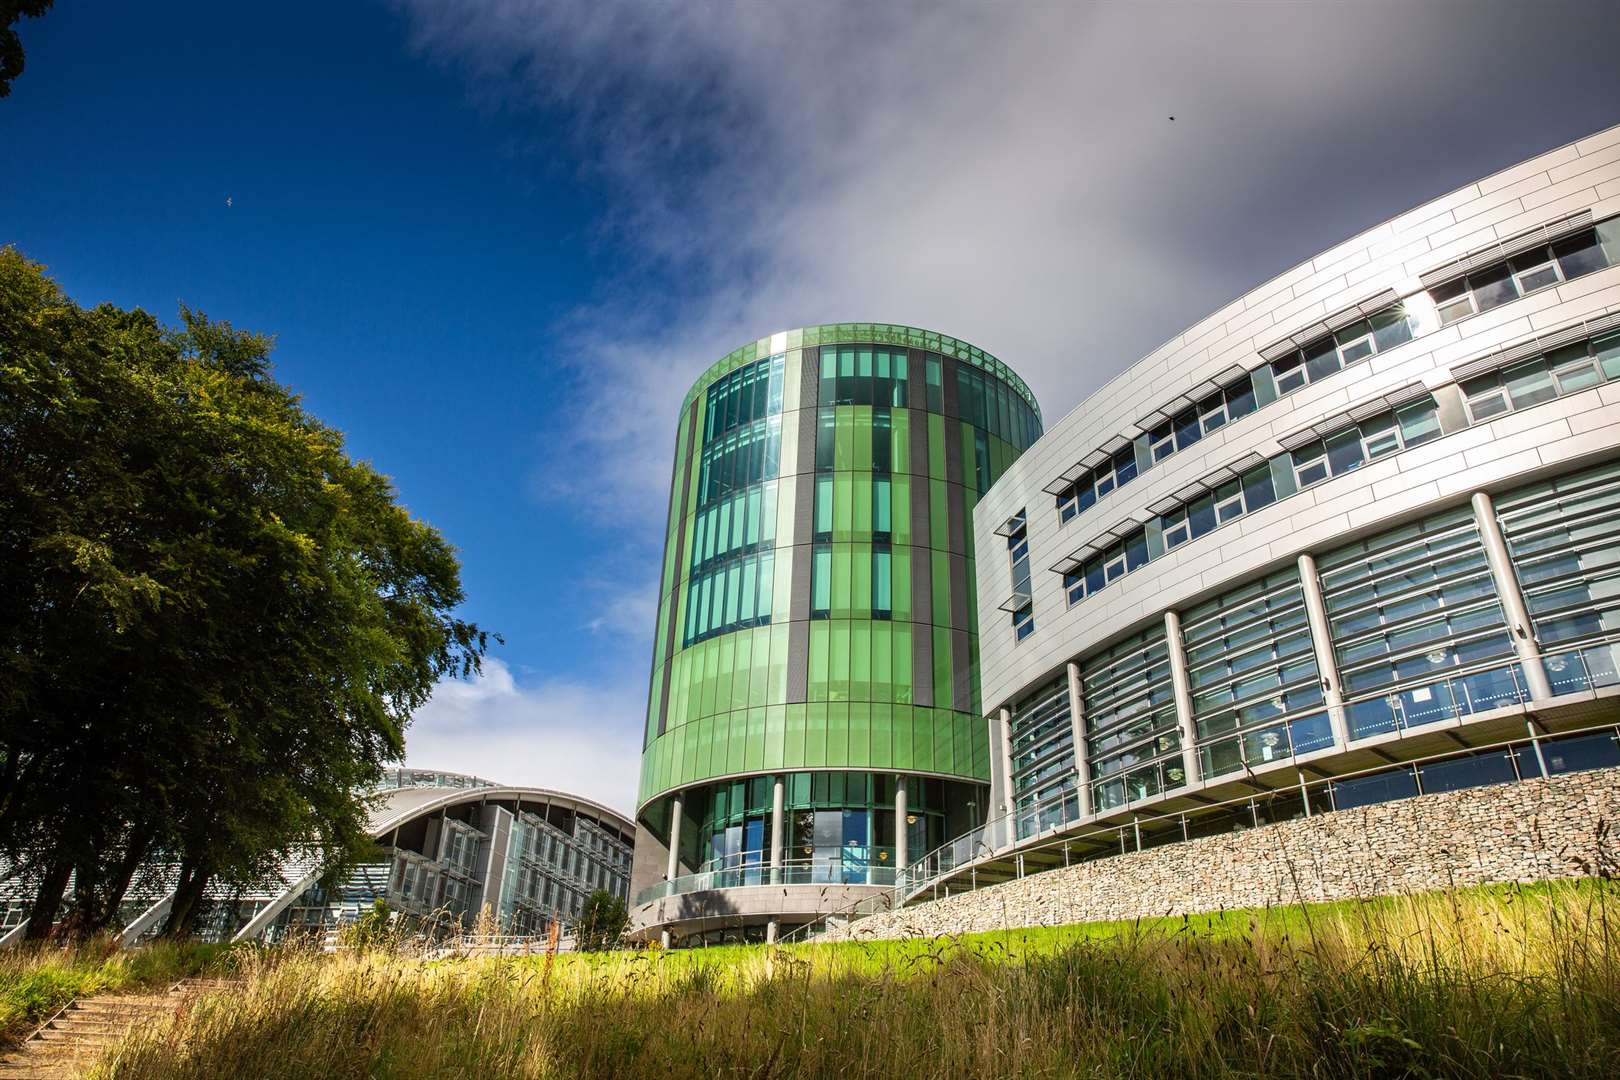 RGU has been awarded £1.7 million to support a number of recovery projects in the north-east.